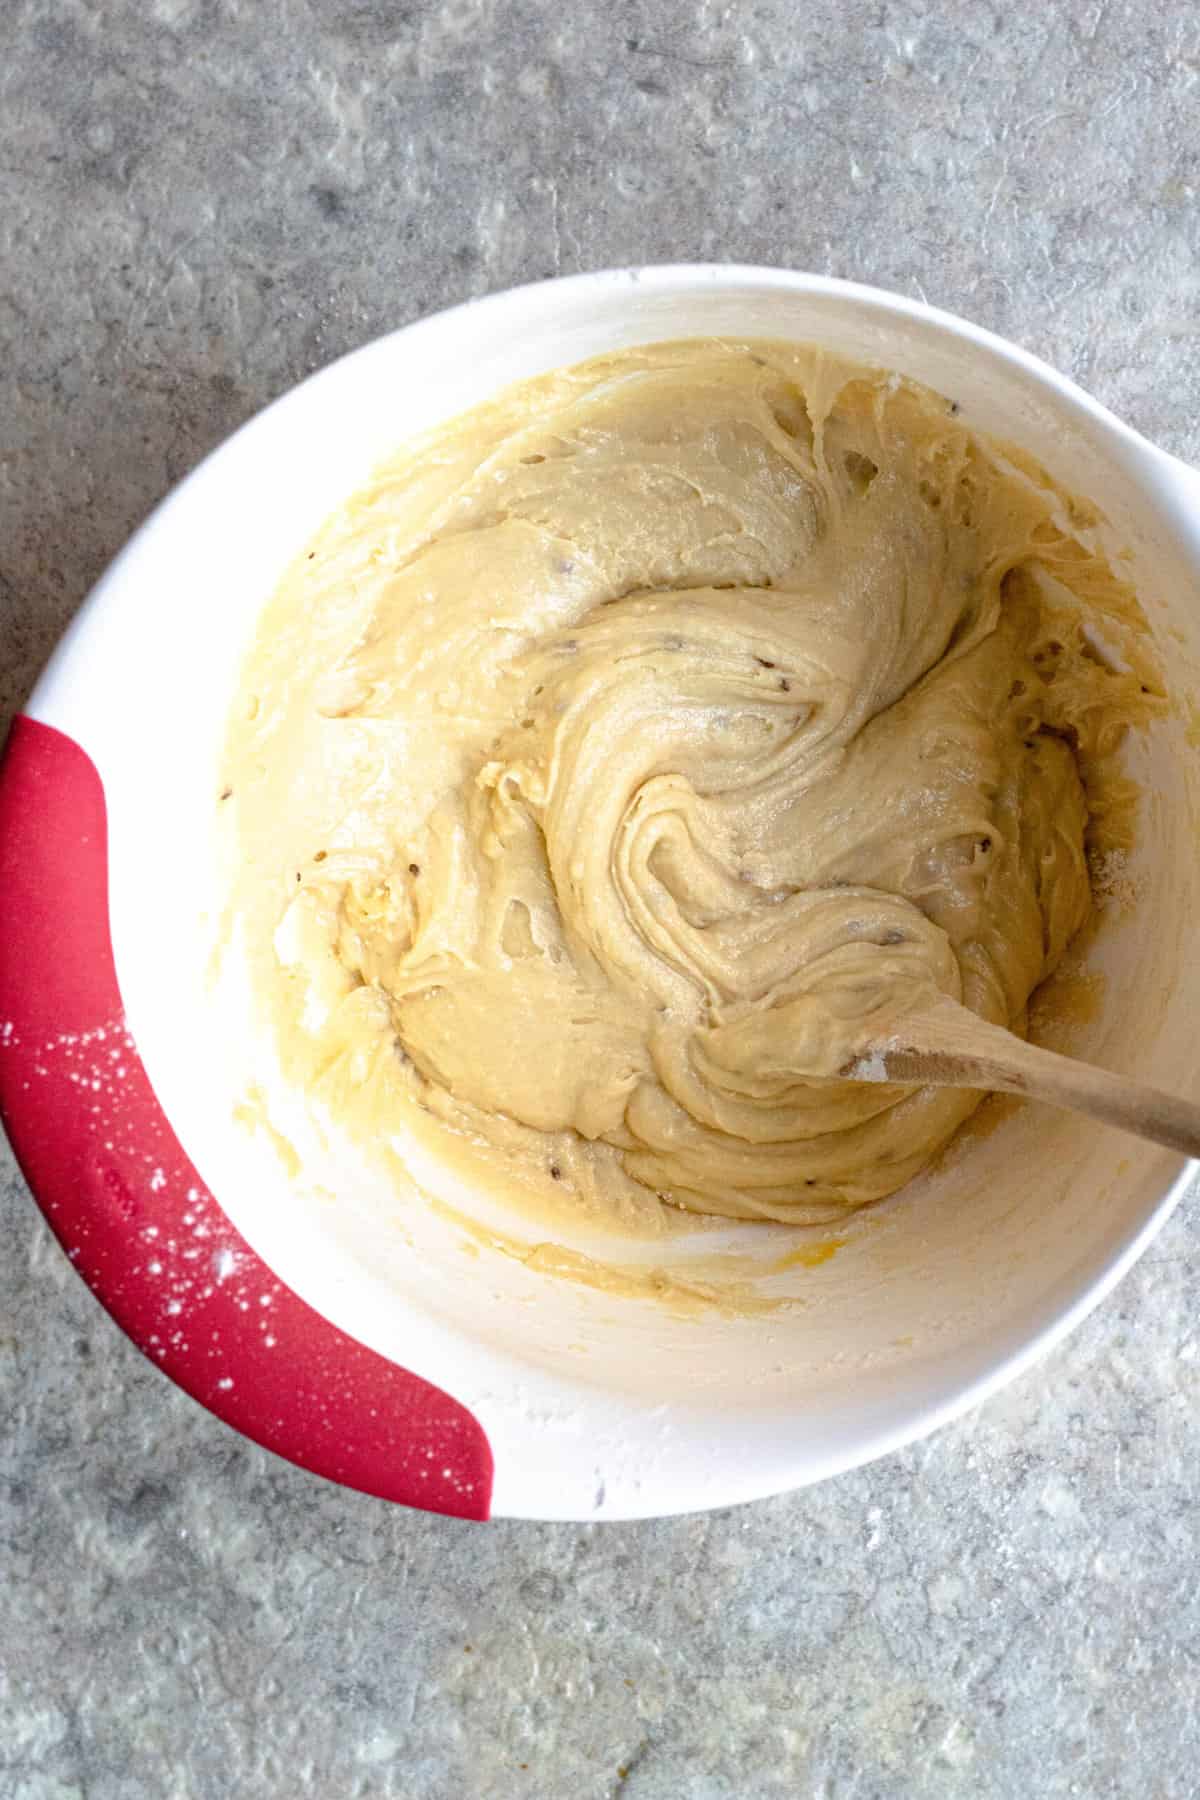 Pizzelle dough in a mixing bowl.